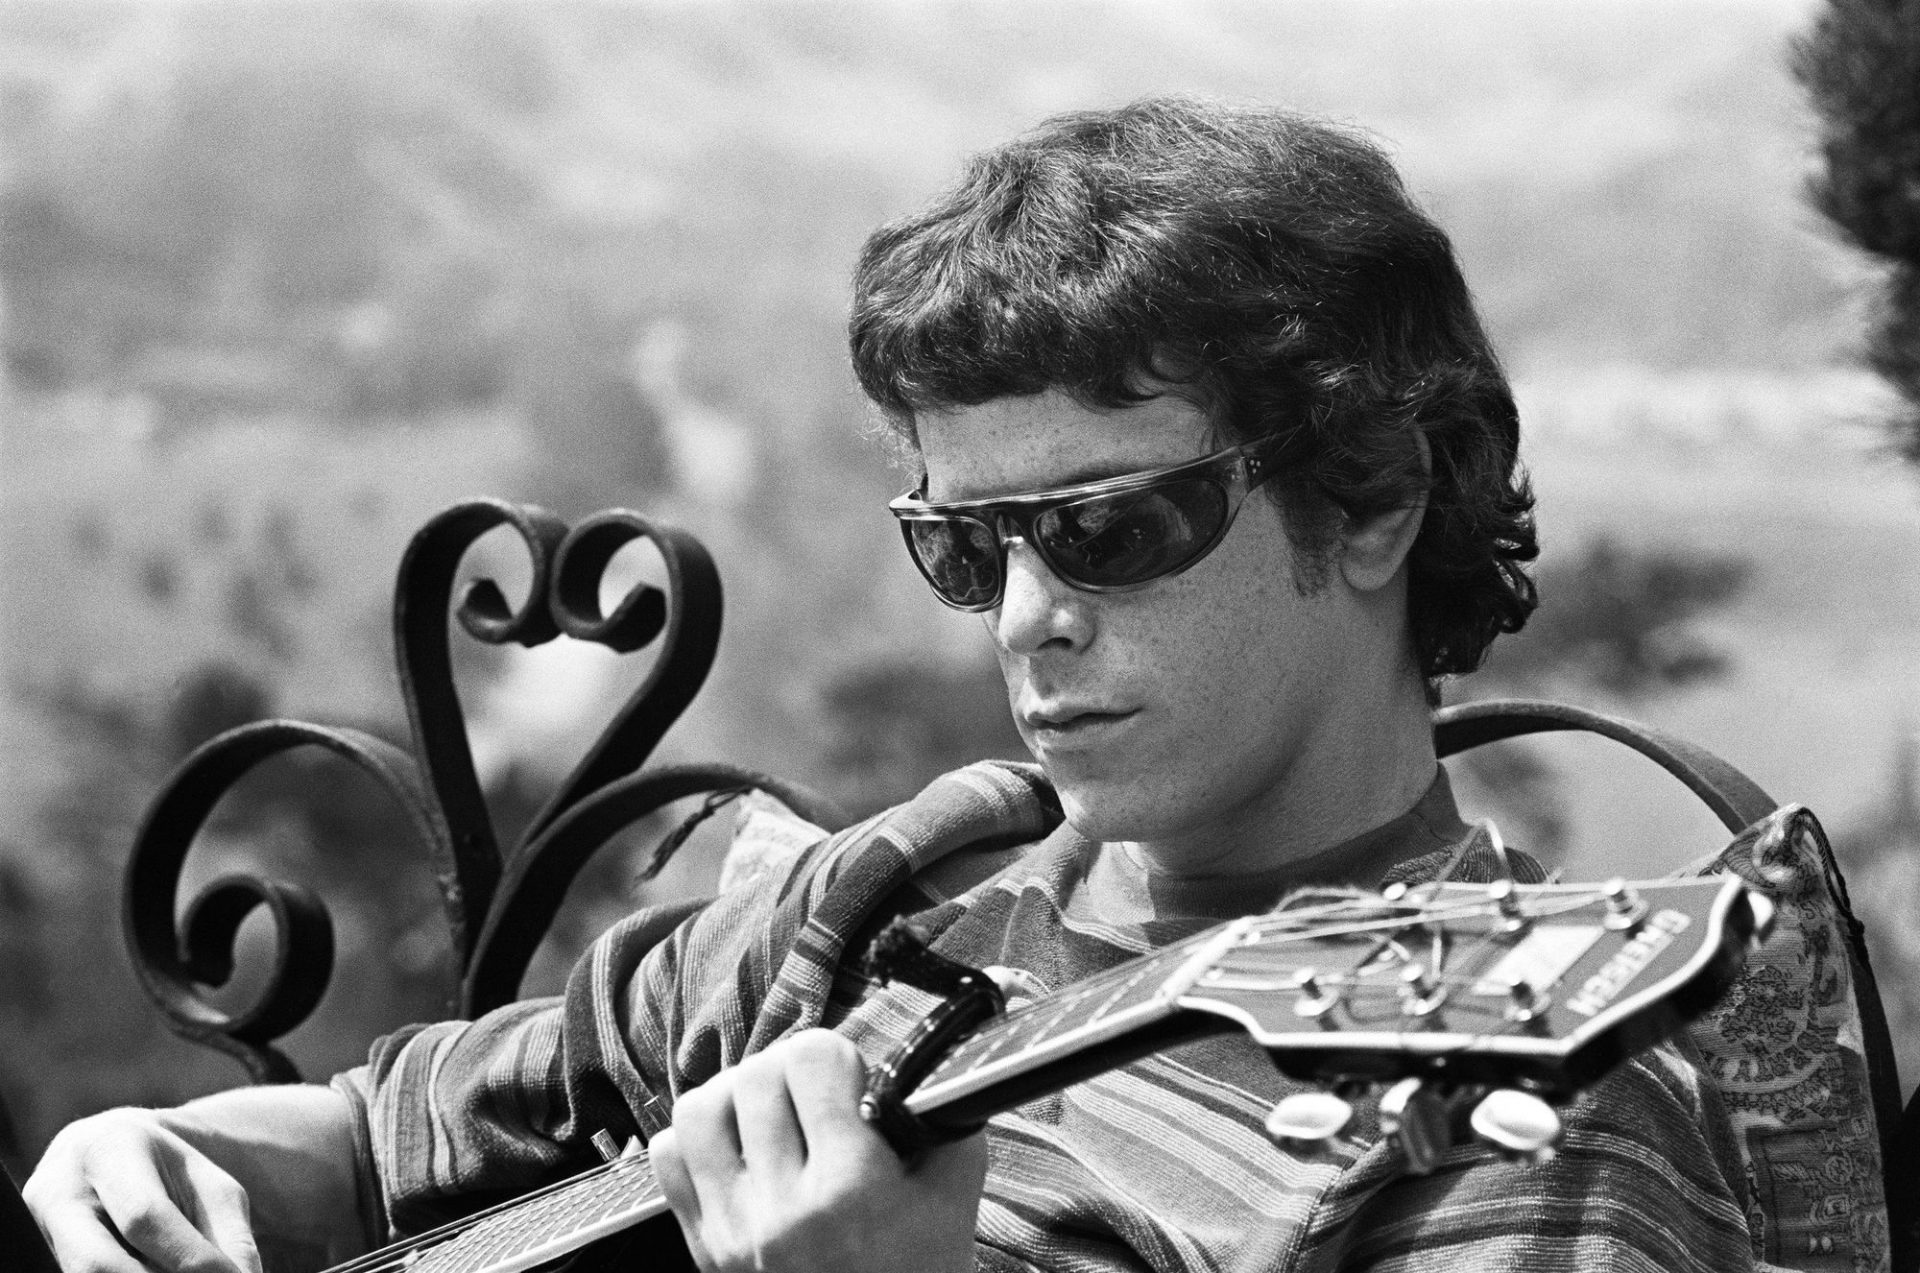 Lou Reed on the guitar